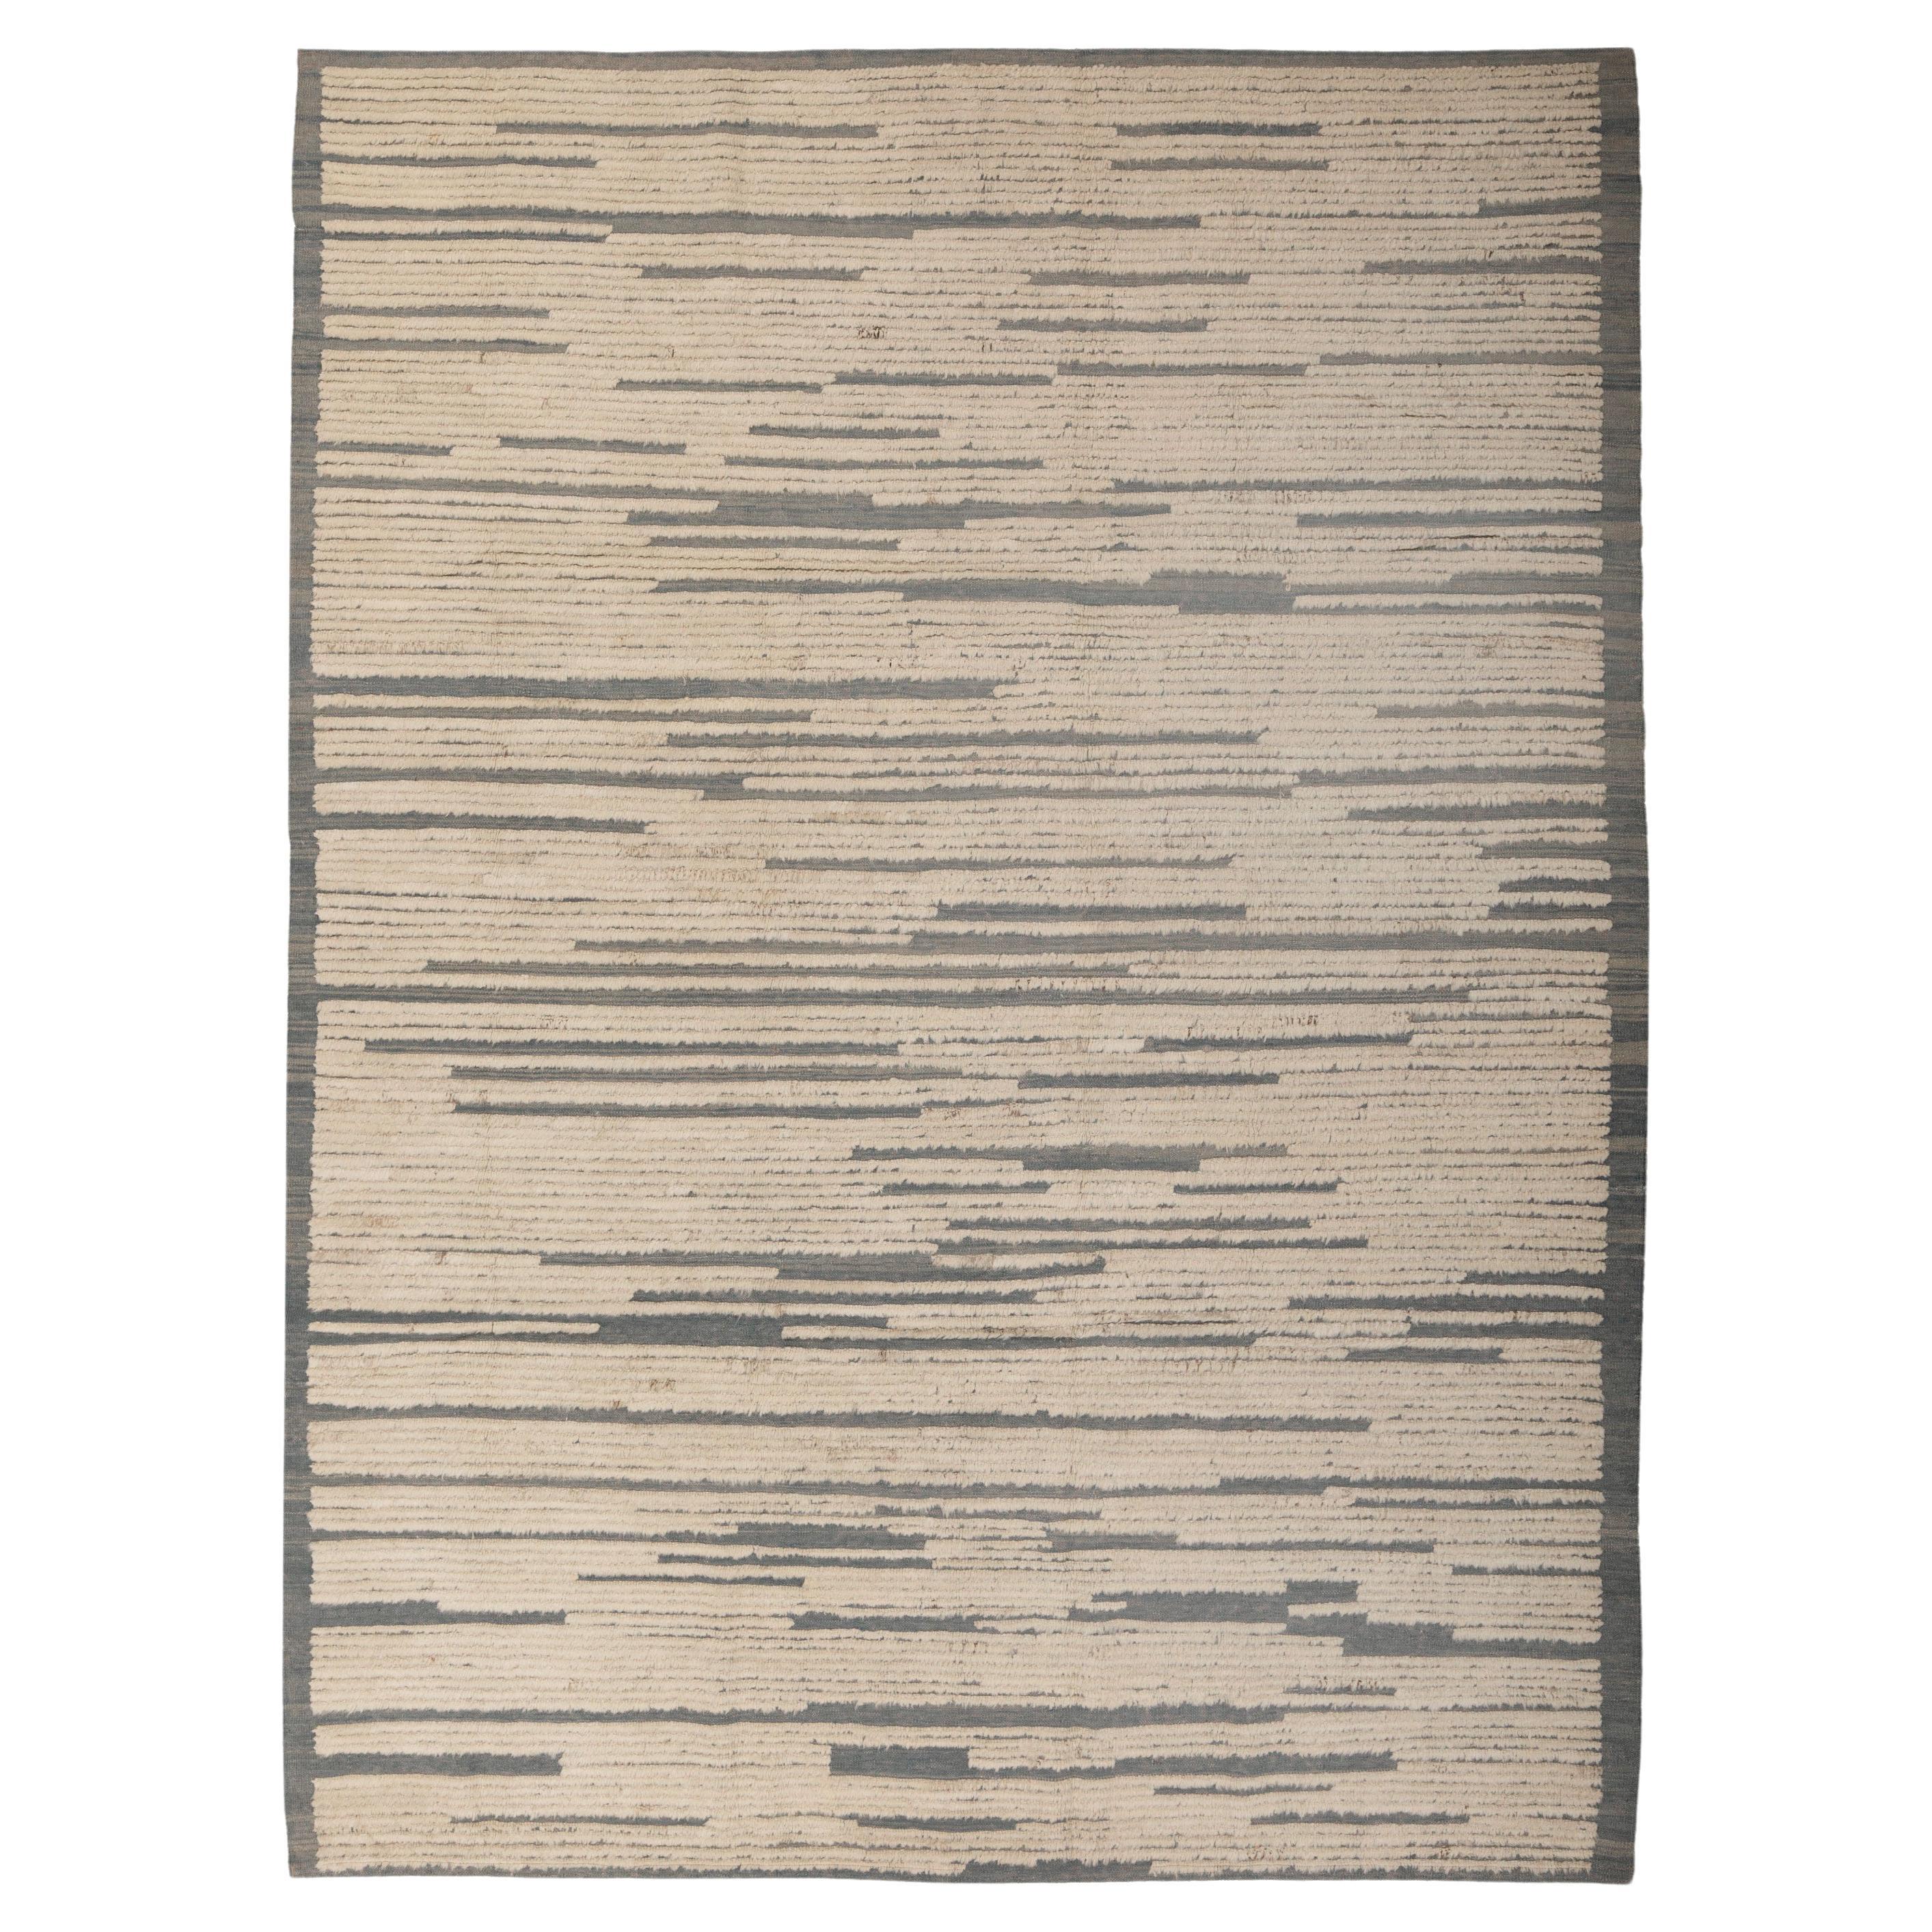 abc carpet Zameen Multicolored Striped Modern Wool Rug - 6'11" x 9'6" For Sale